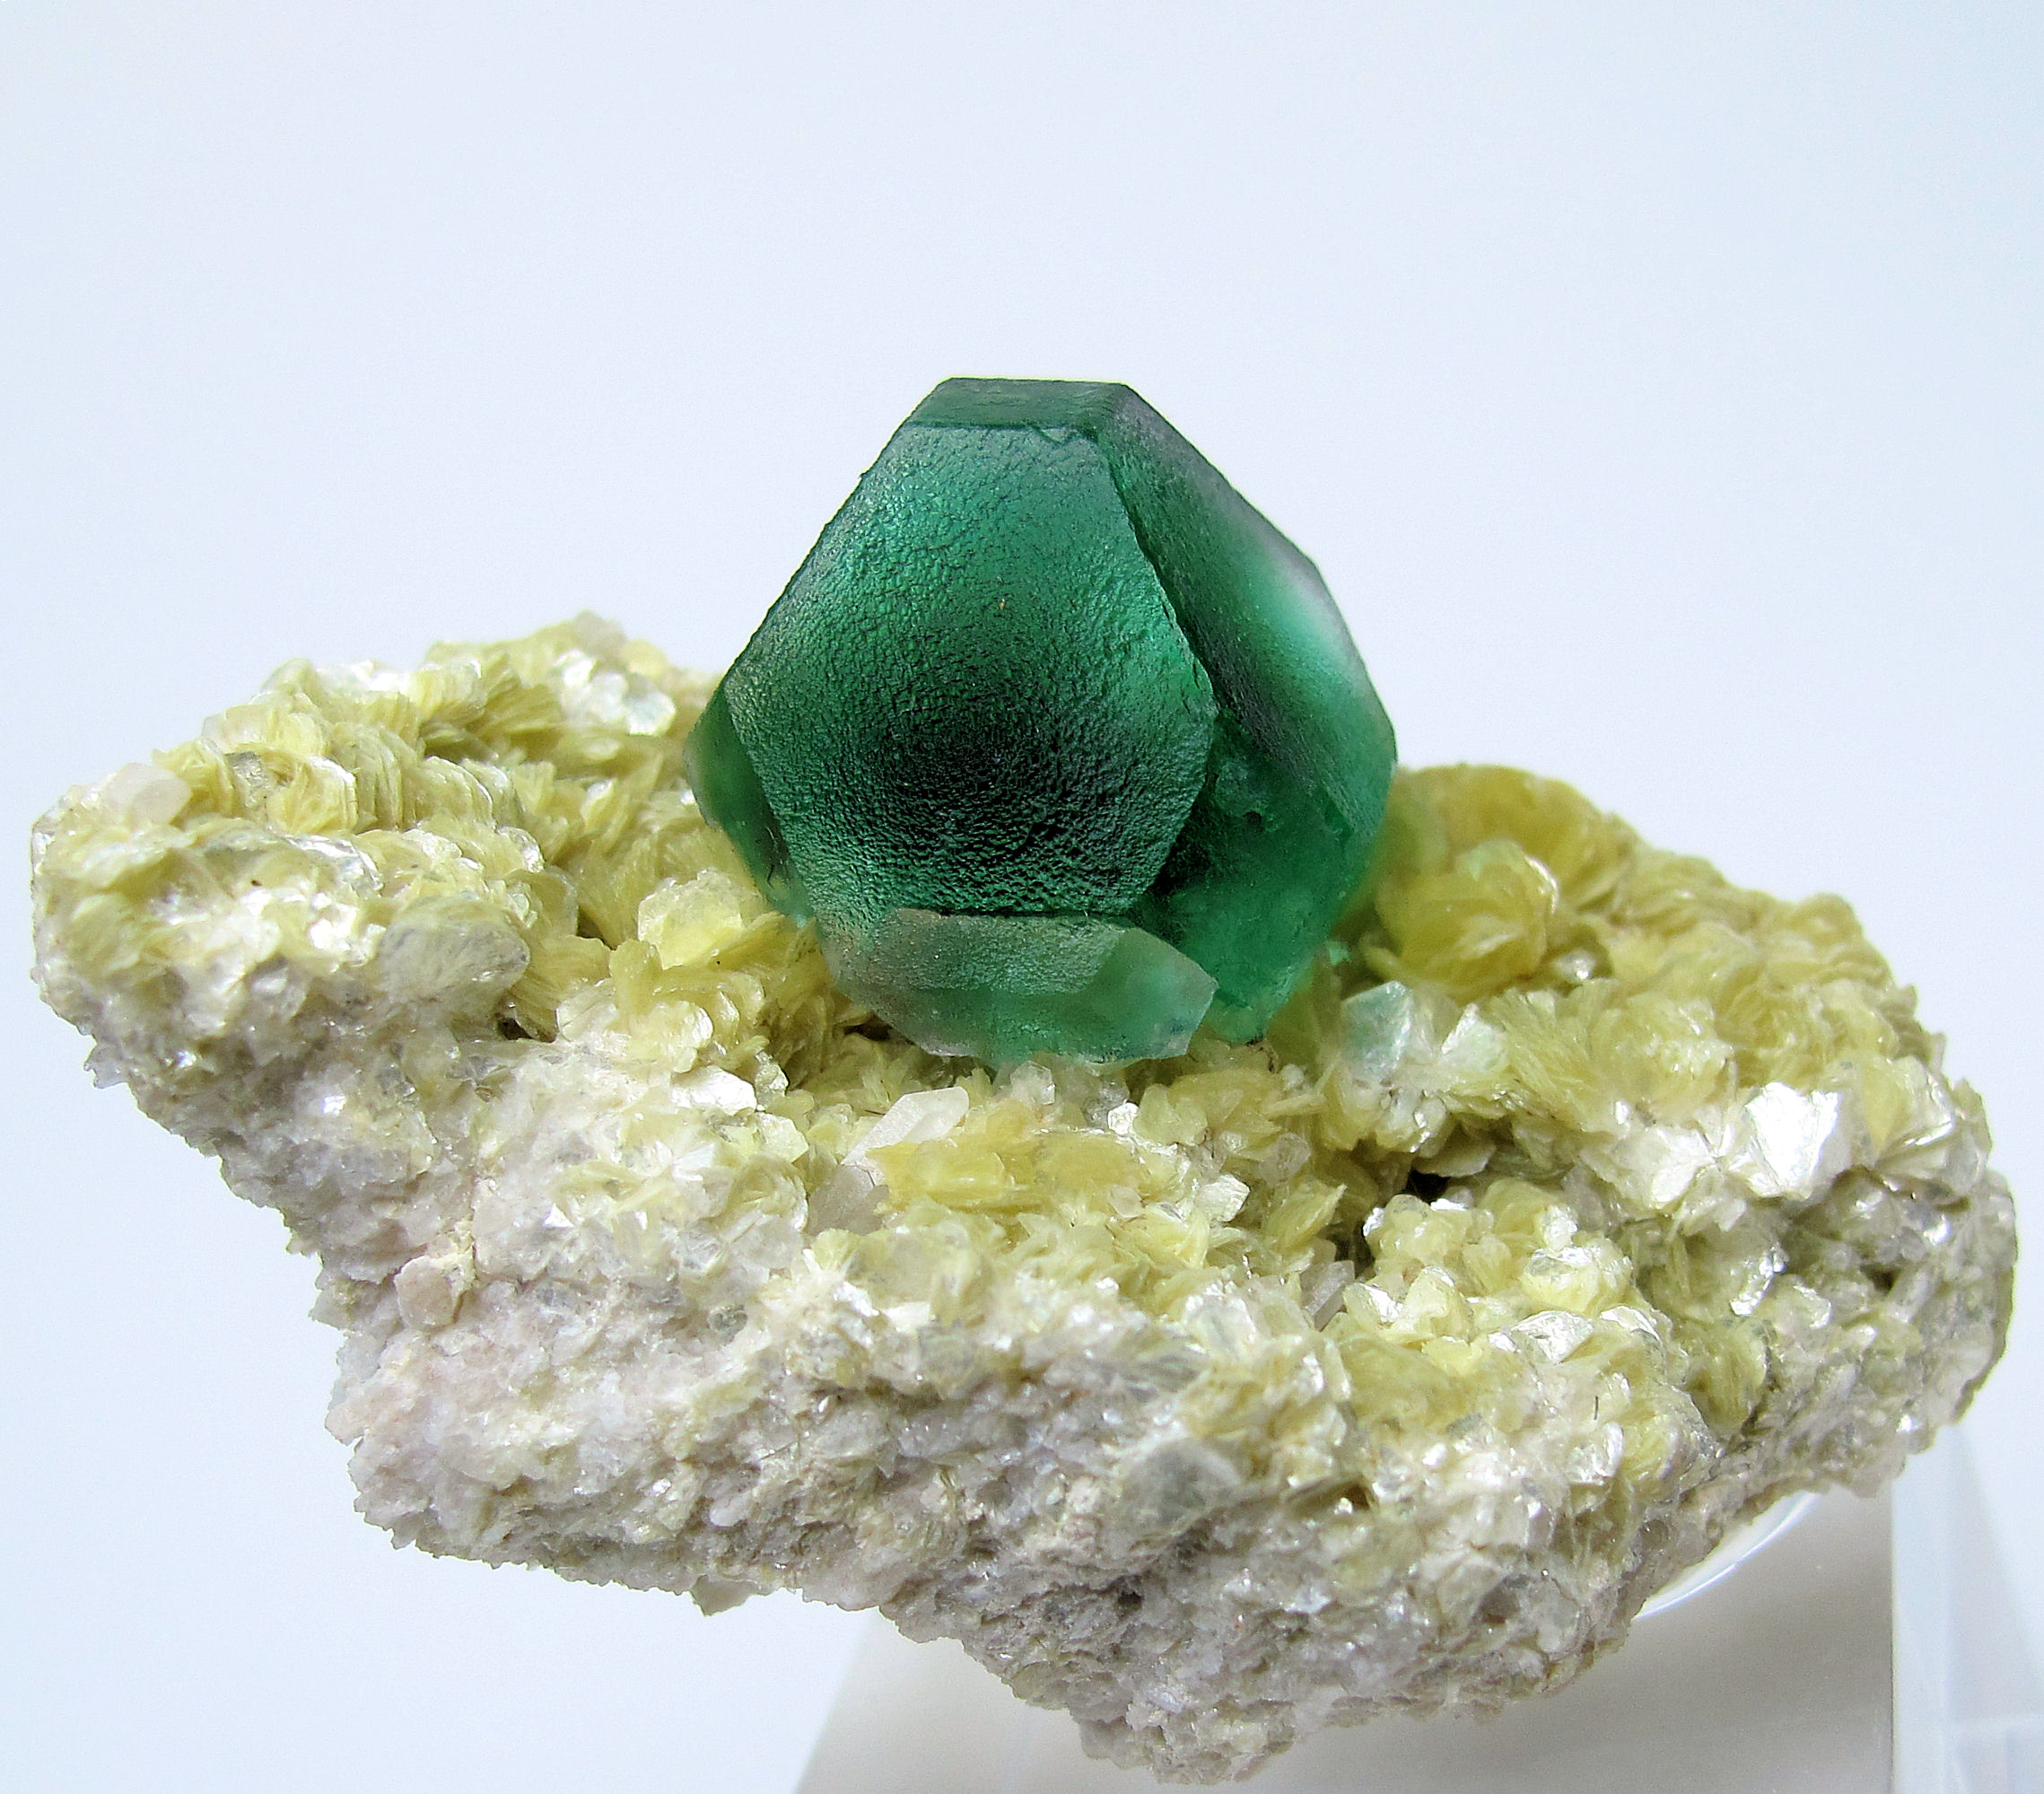 What Are Fluorite Crystals And Their Healings Properities